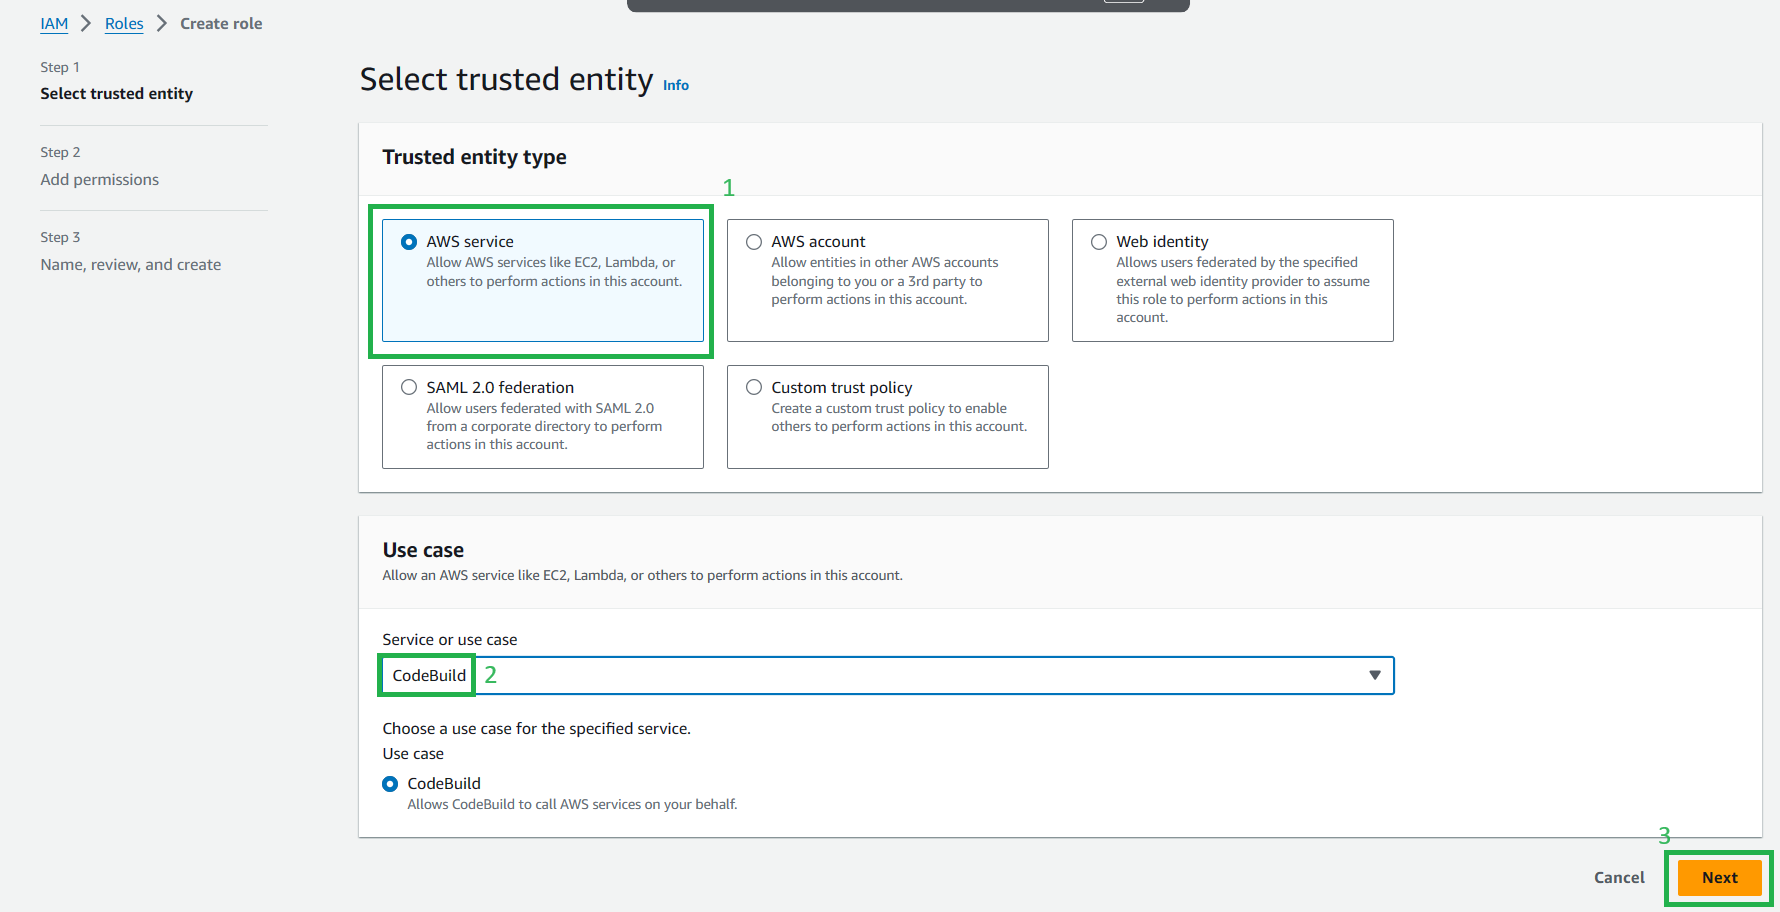 Select trusted entity